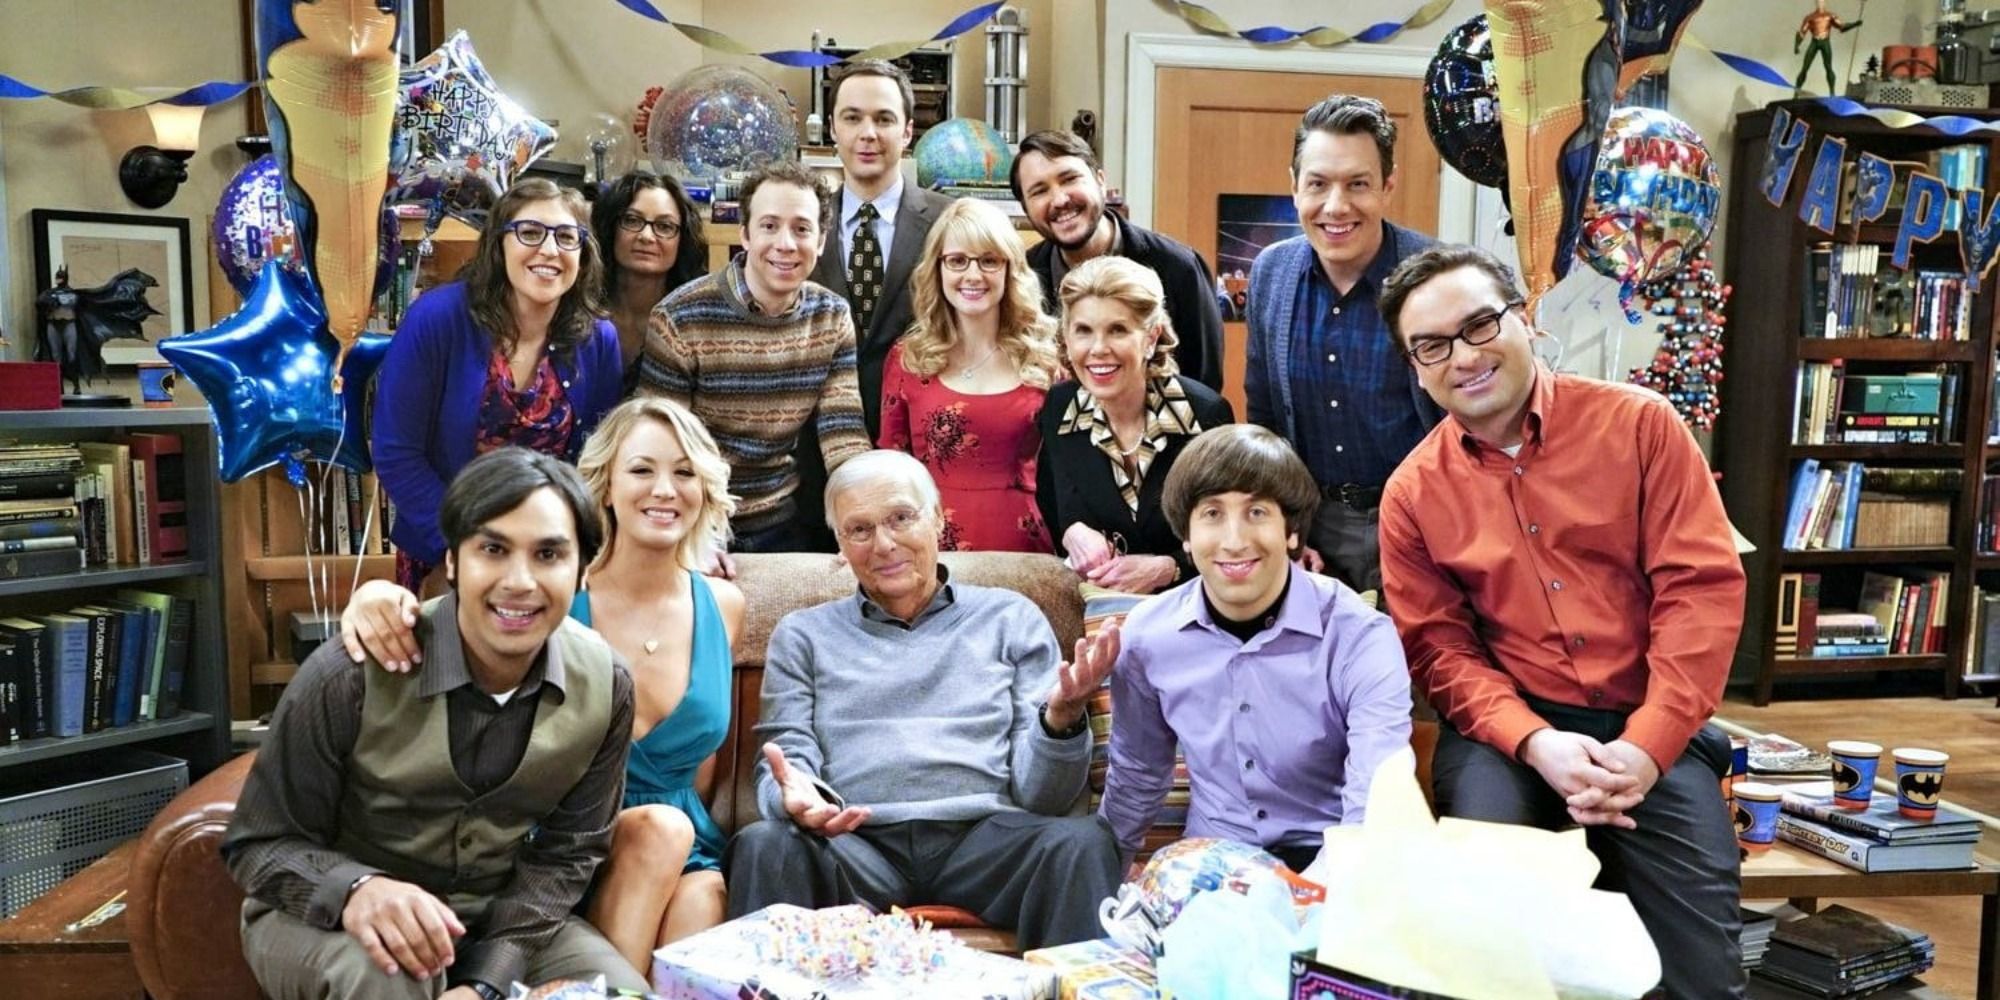 Adam West and The Big Bang Theory Cast